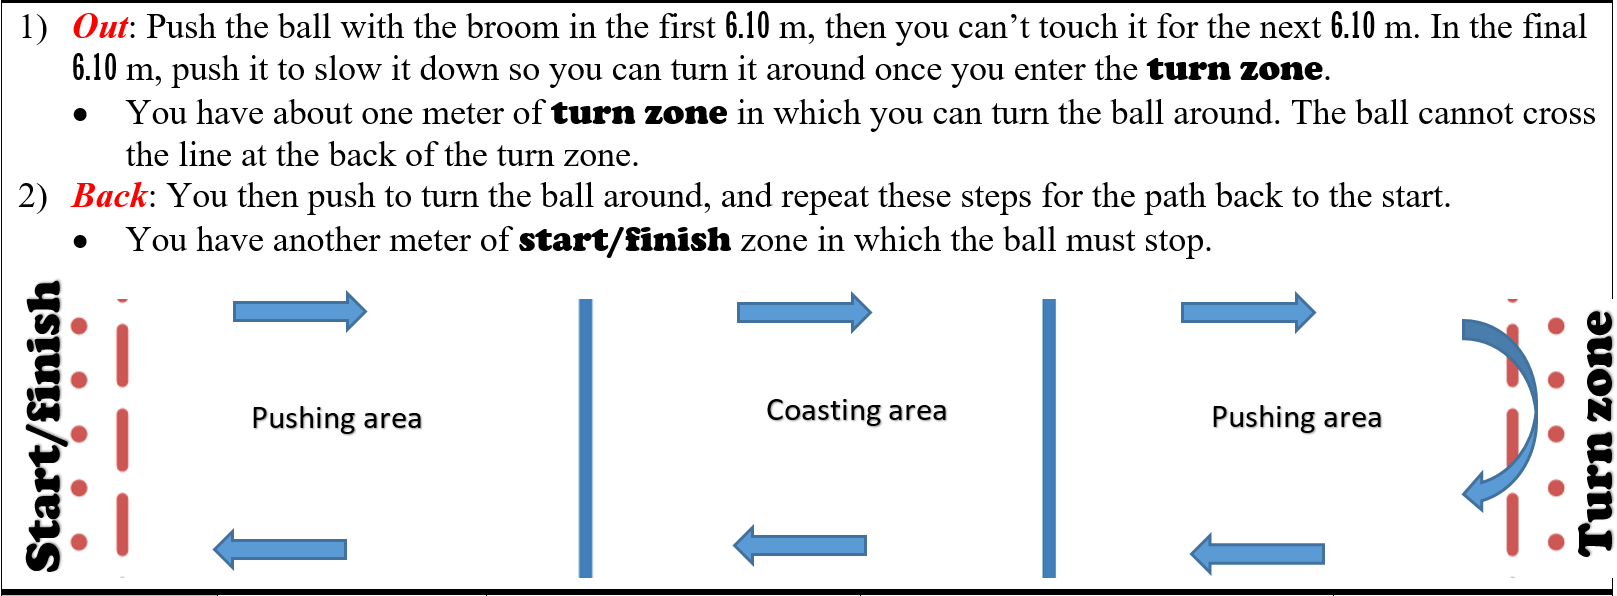 Bowling ball challenge: Following up on the broom activity